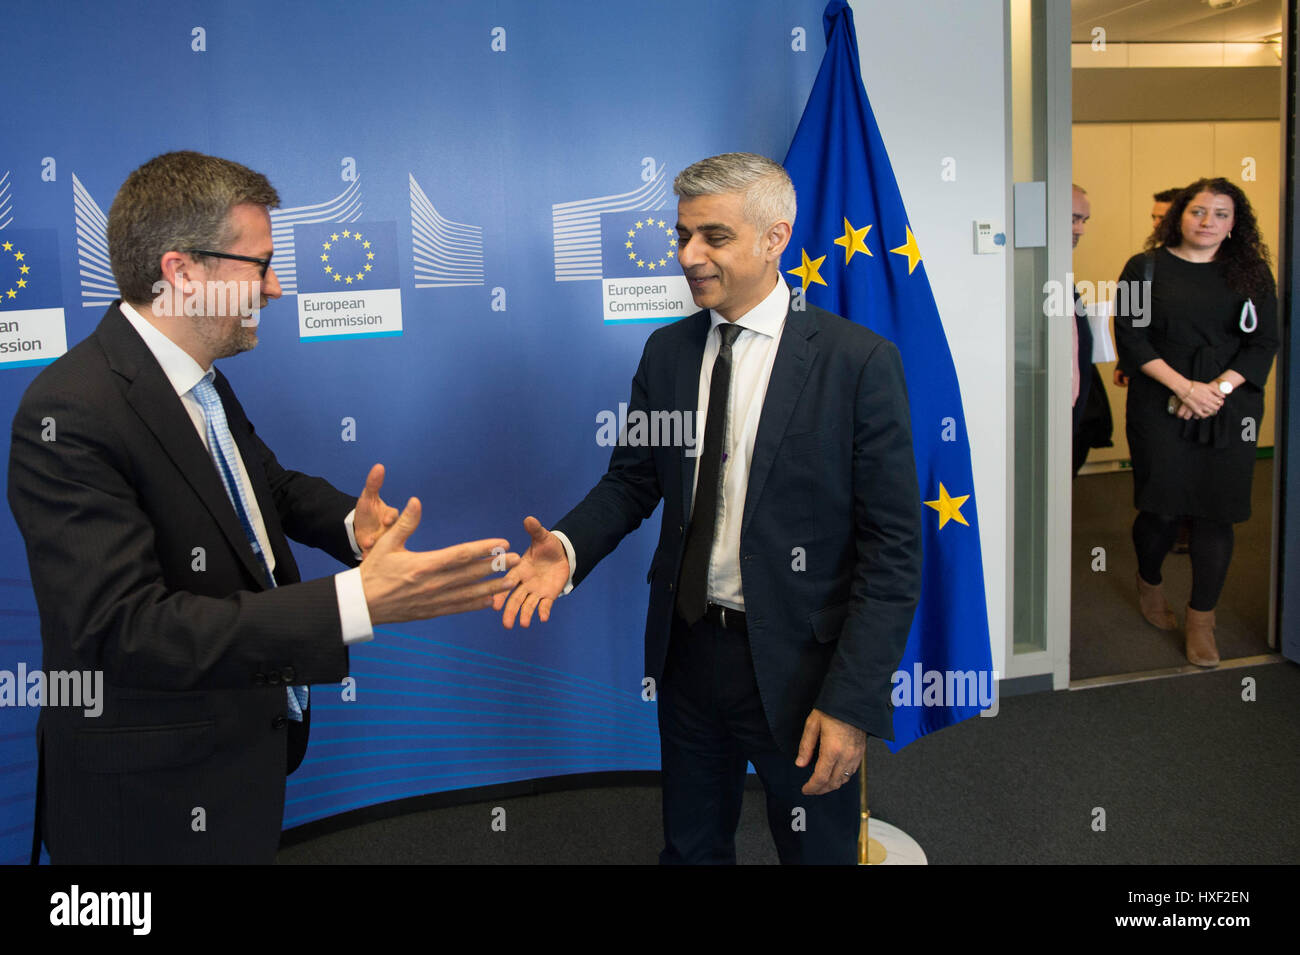 Mayor of London Sadiq Khan meets EU Commissioner Carlos Moedas at the European Commission in Brussels during his three day visit to Paris and Brussels where he will meet EU leaders and officials to talk about Brexit and the recent terror attack in London. Stock Photo